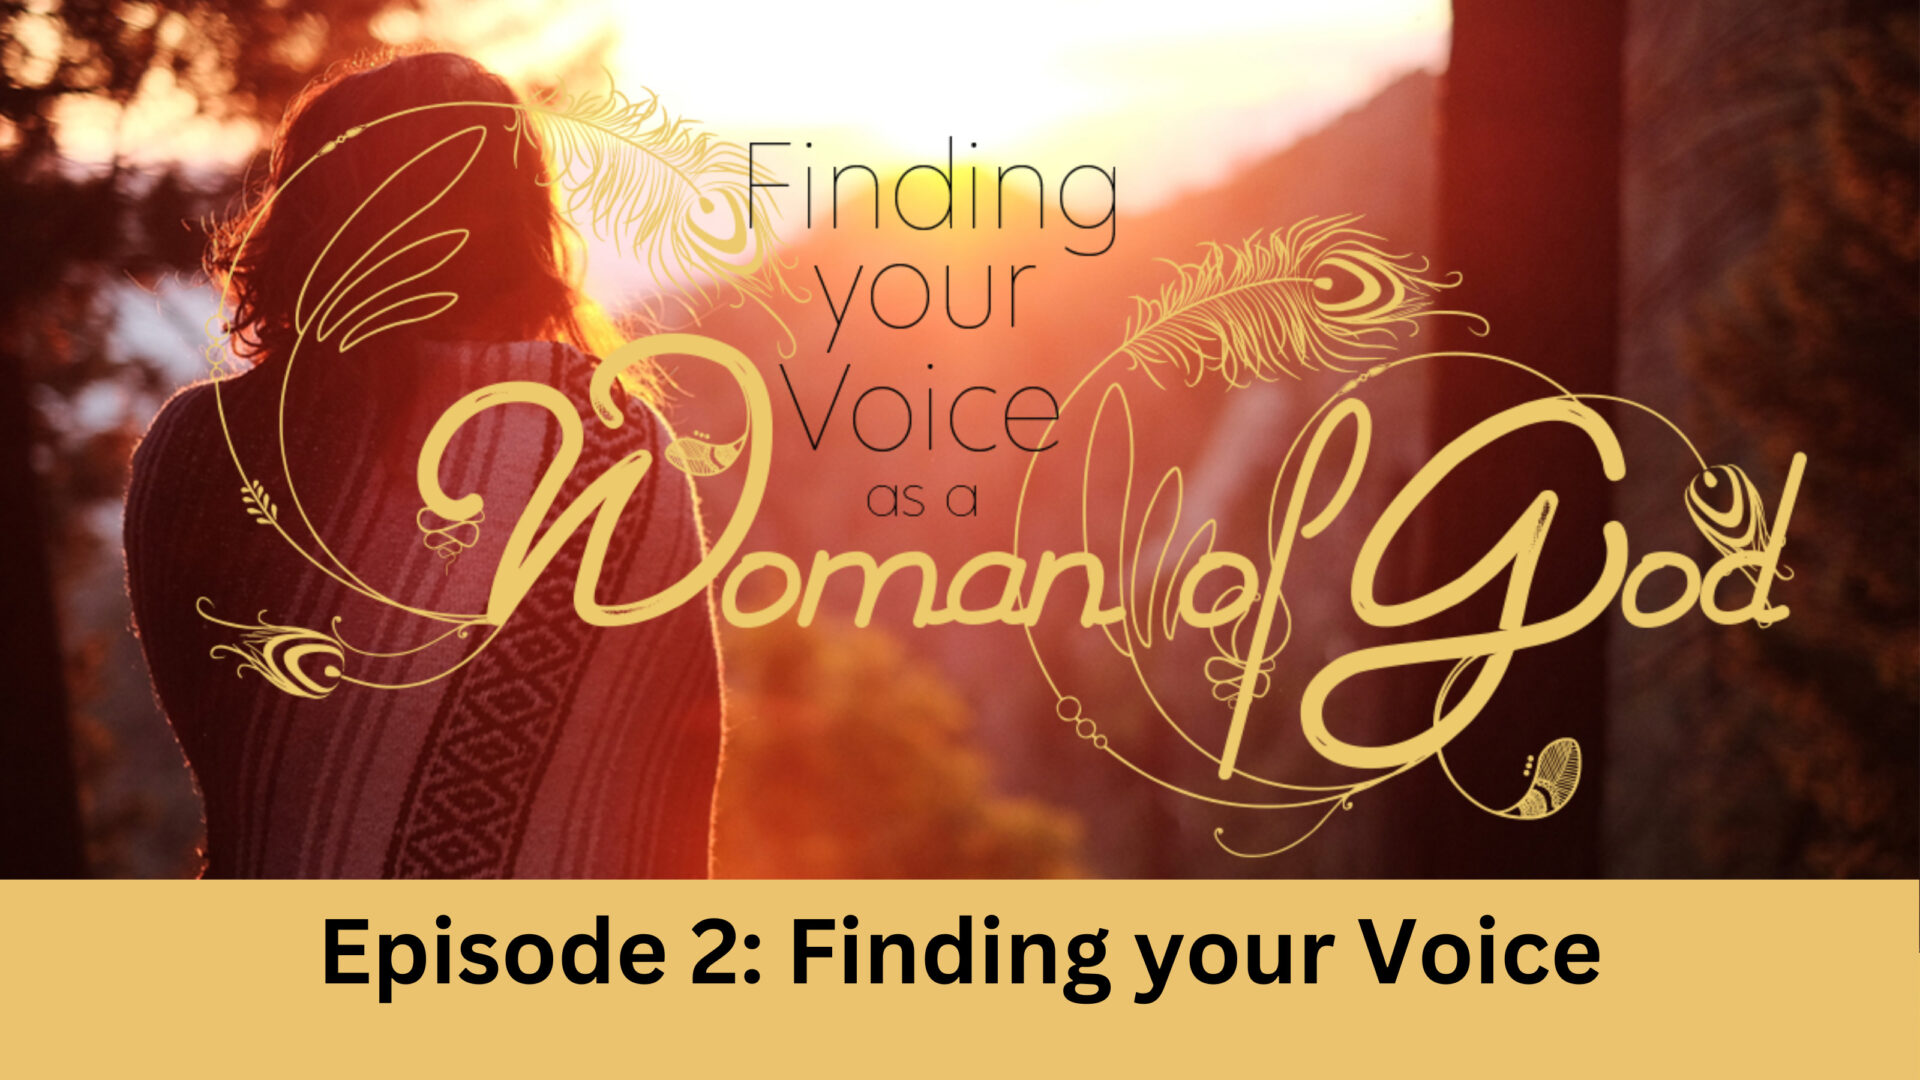 Episode 2: Finding Your Voice